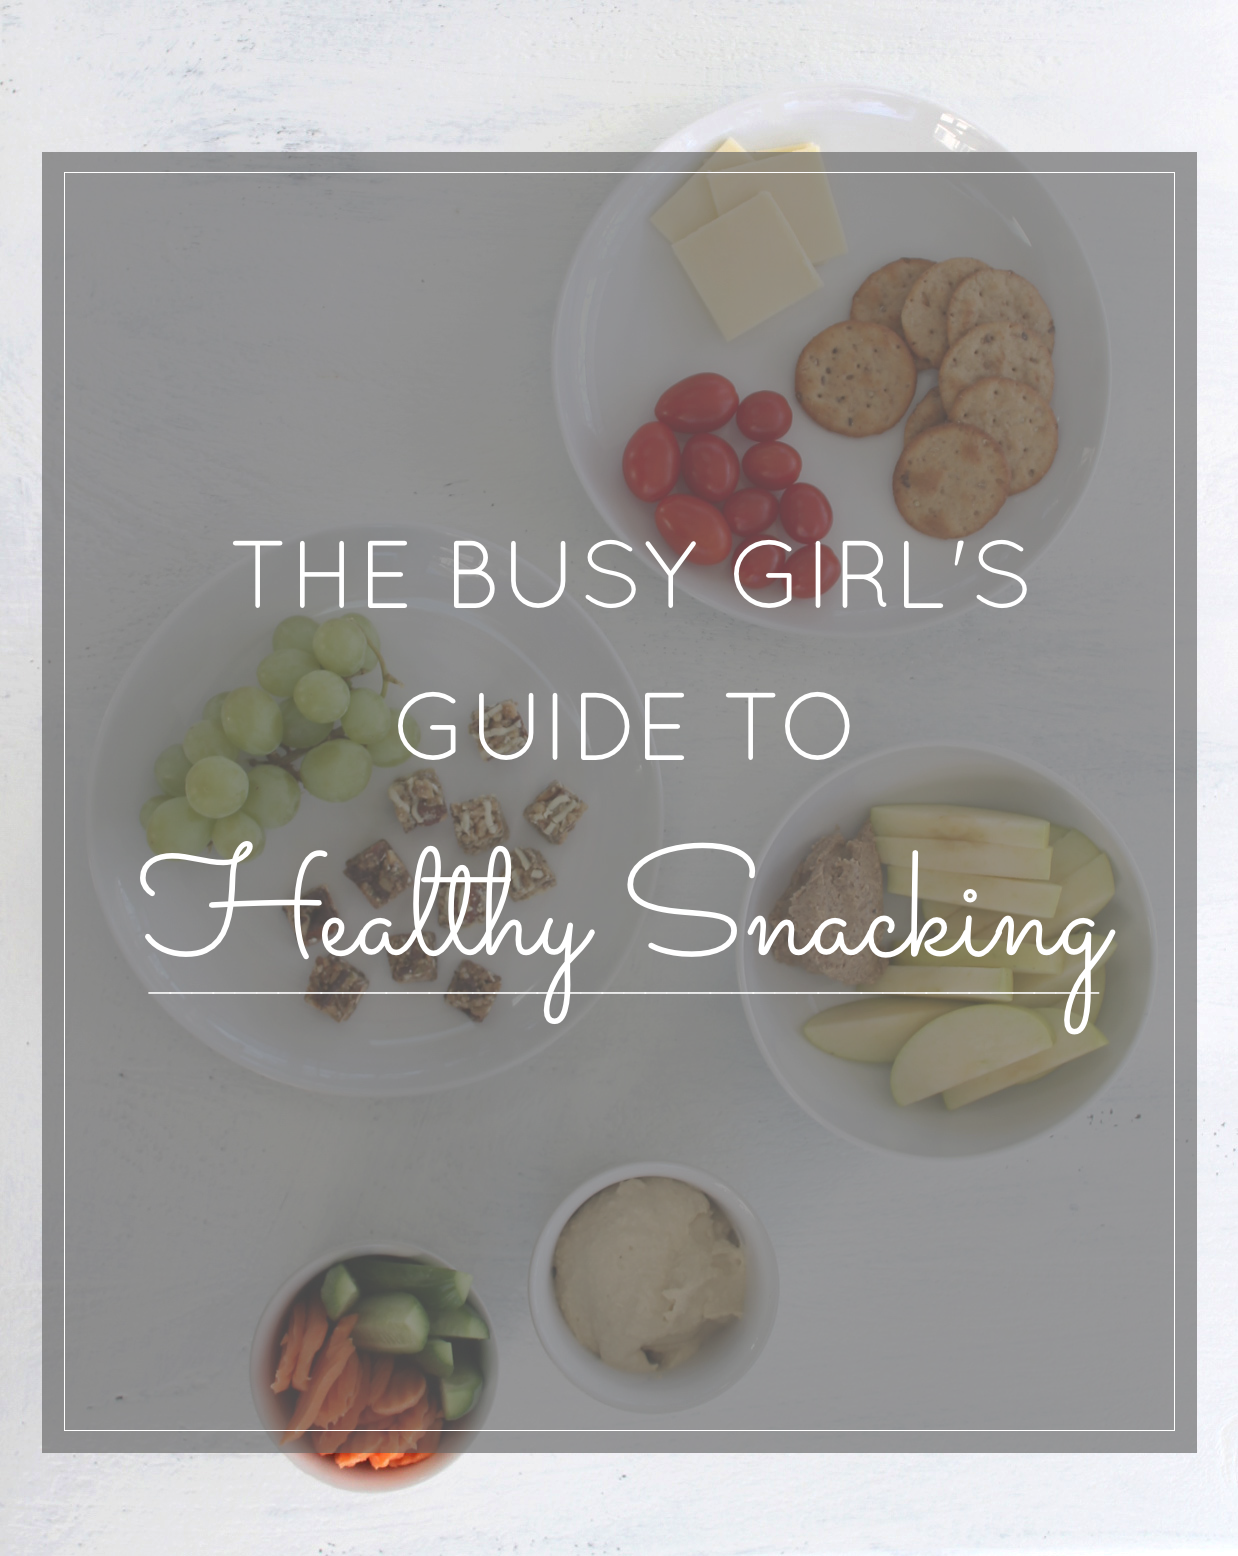 The Busy Girl's Guide to Healthy Guilt-Free Snacking (for snackaholics!)